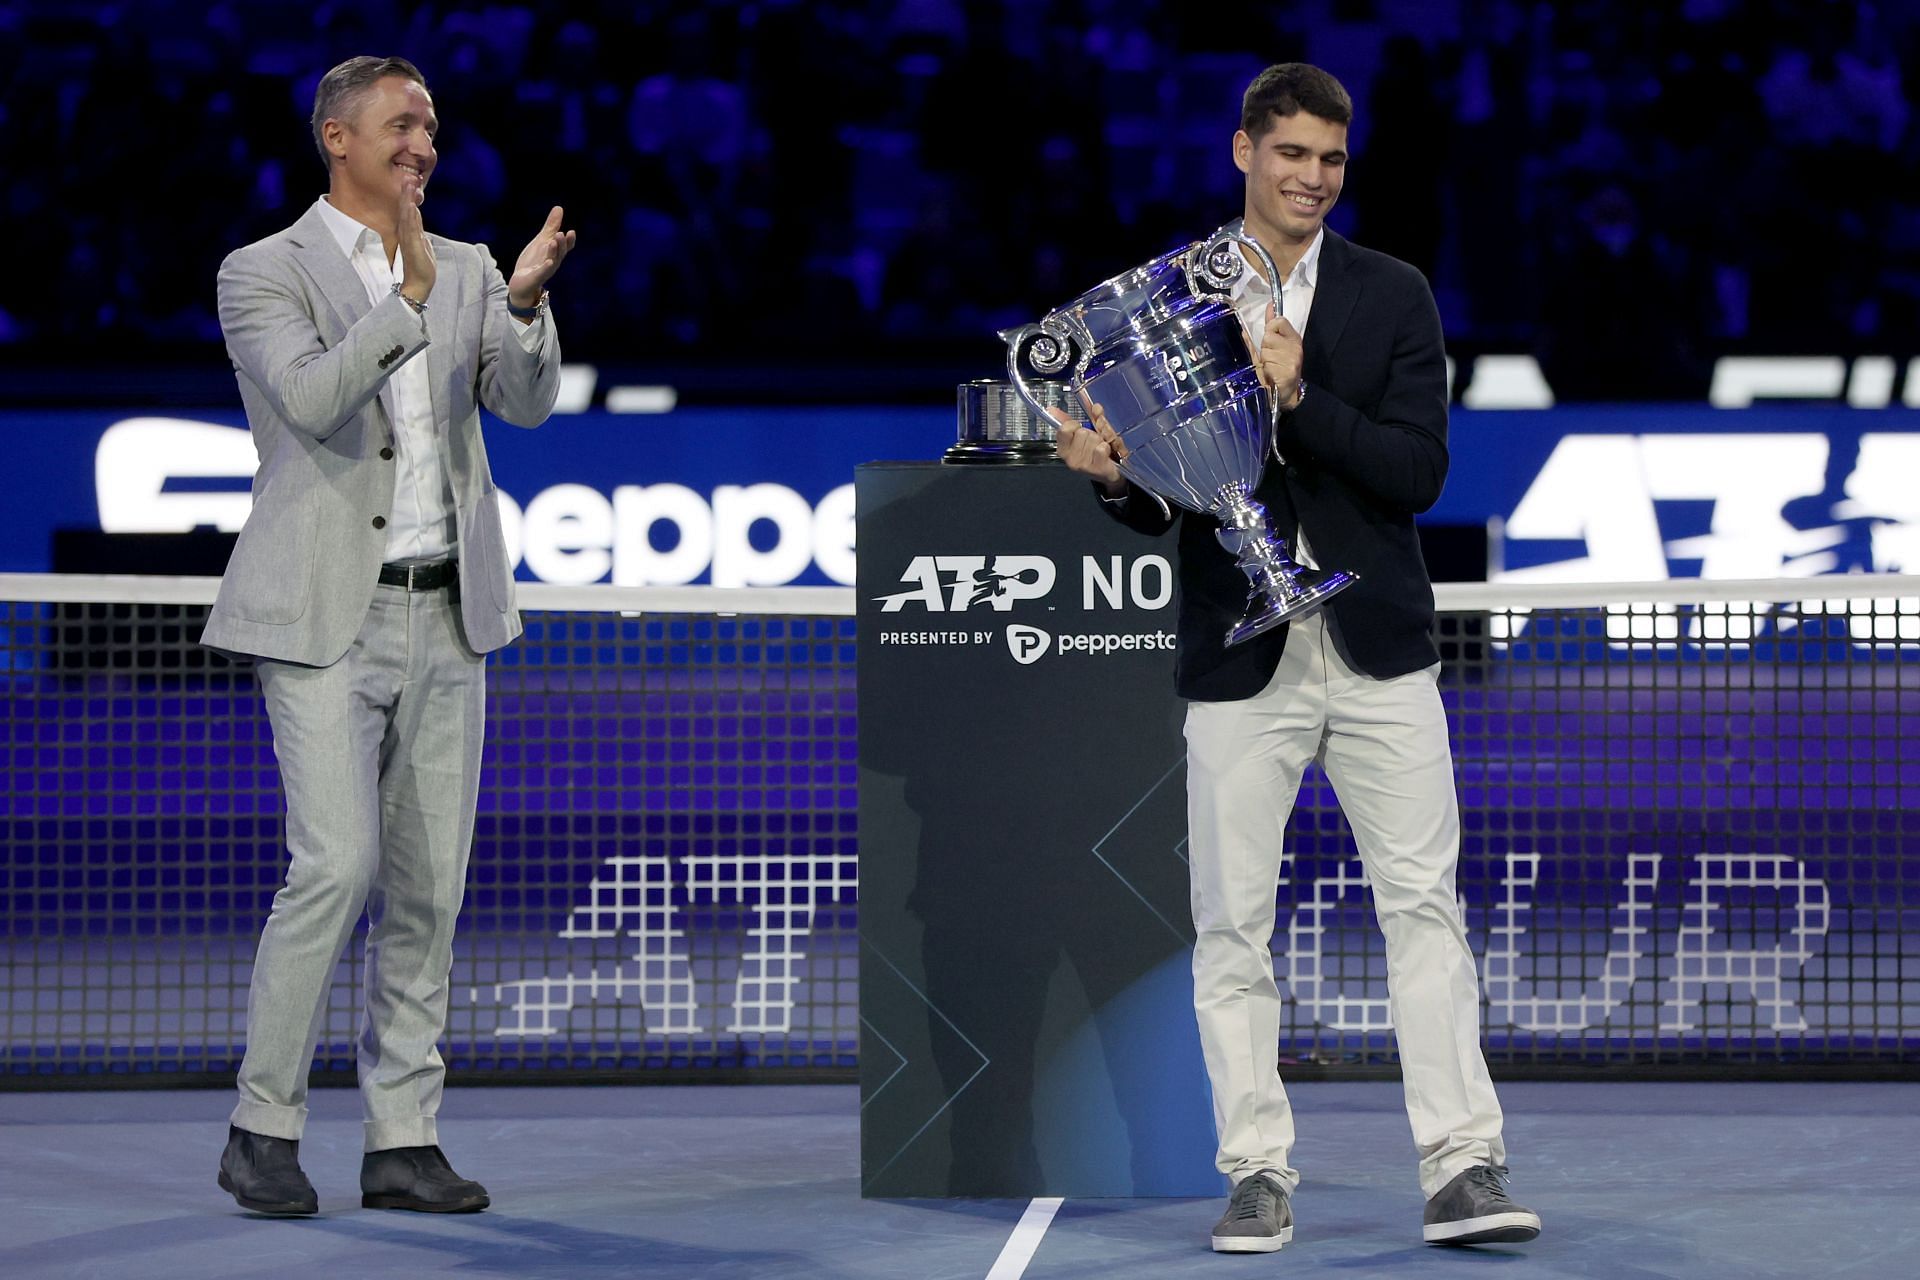 Carlos Alcaraz lifted his first year-end World No. 1 trophy in 2022